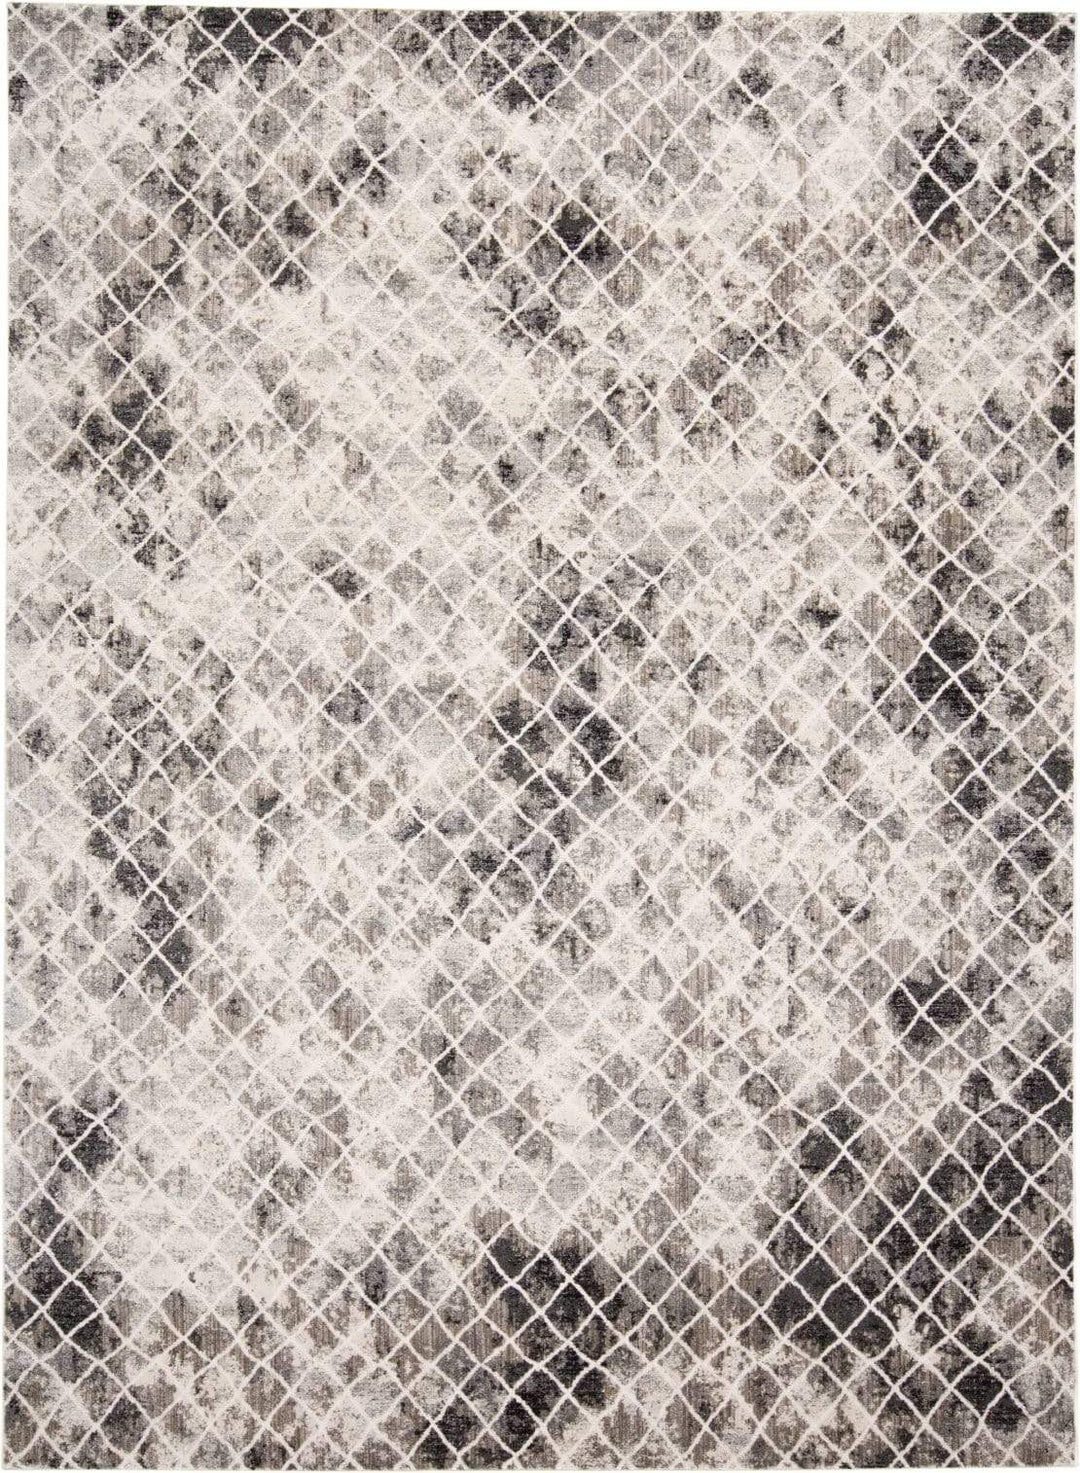 Feizy Feizy Kano Distressed Diamonds Rug - Charcoal & Beige - Available in 8 Sizes 2'-2" x 3' 8643873FSNDIVYA08